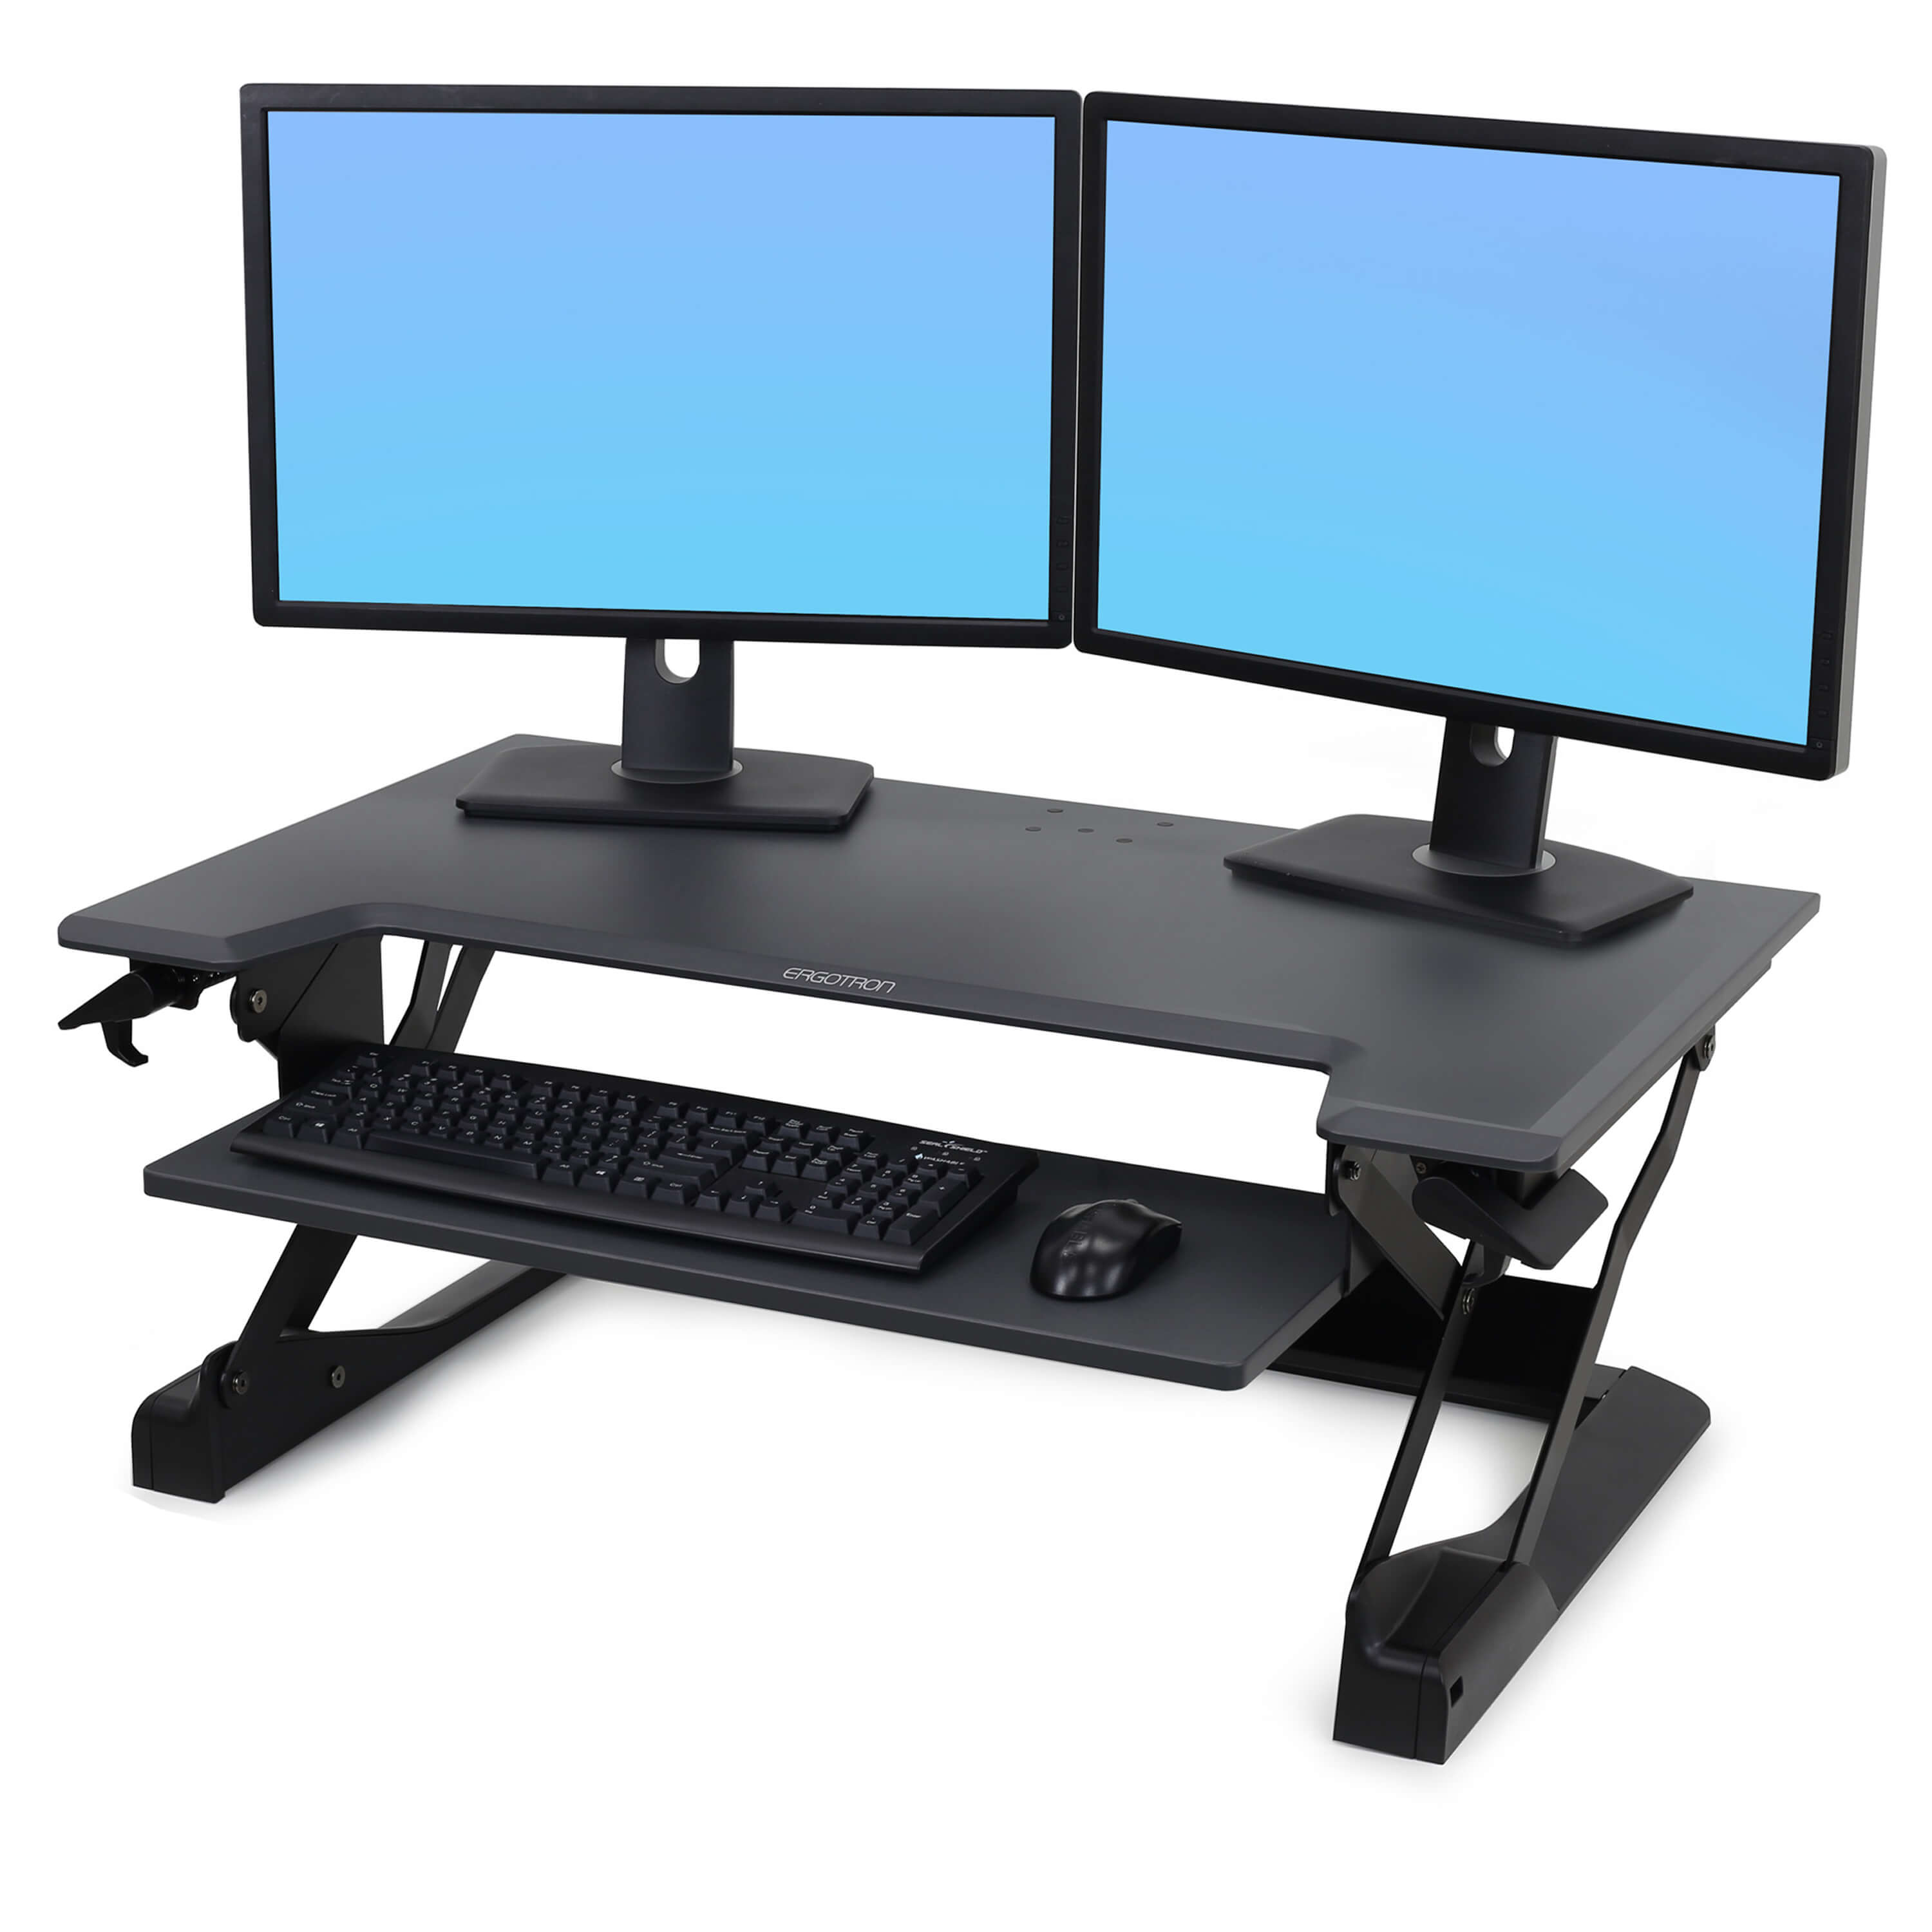 What is sit stand workstation